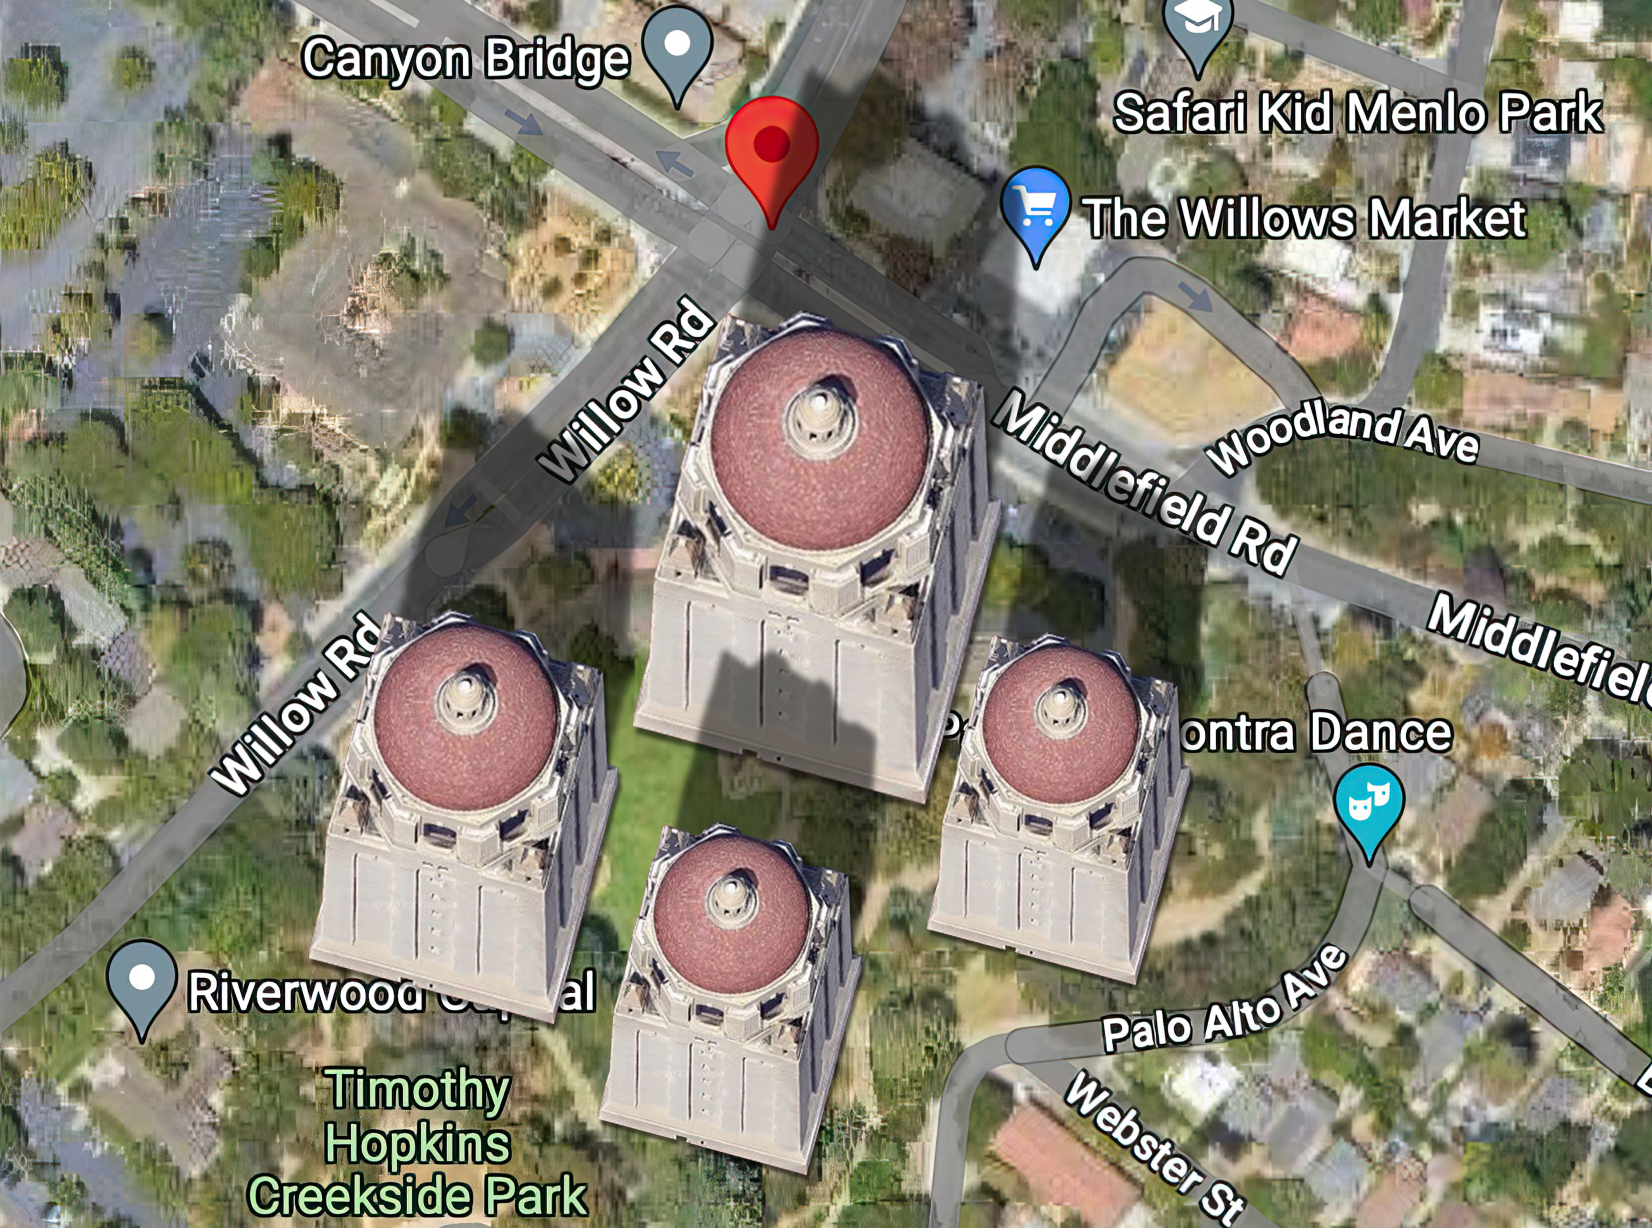 Our neighborhood voices will road tower hoover tower builders remedy palo alto middlefield road willow road apartment palo alto builders remedy